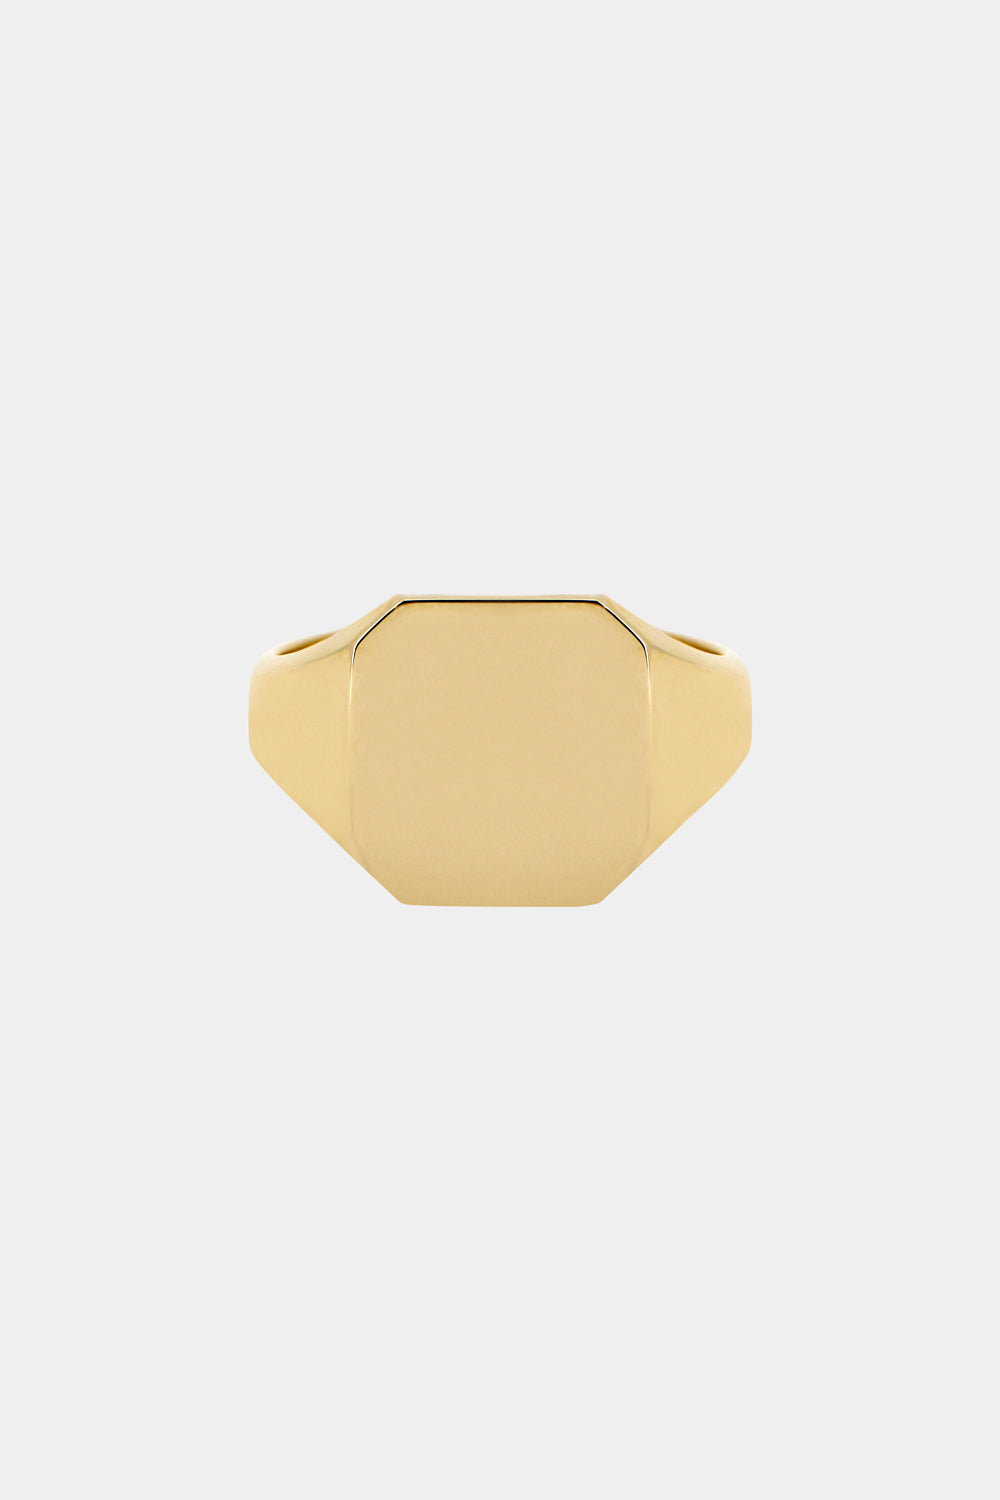 Tallows Signet Ring | Yellow Gold, More Options Available| Natasha Schweitzer